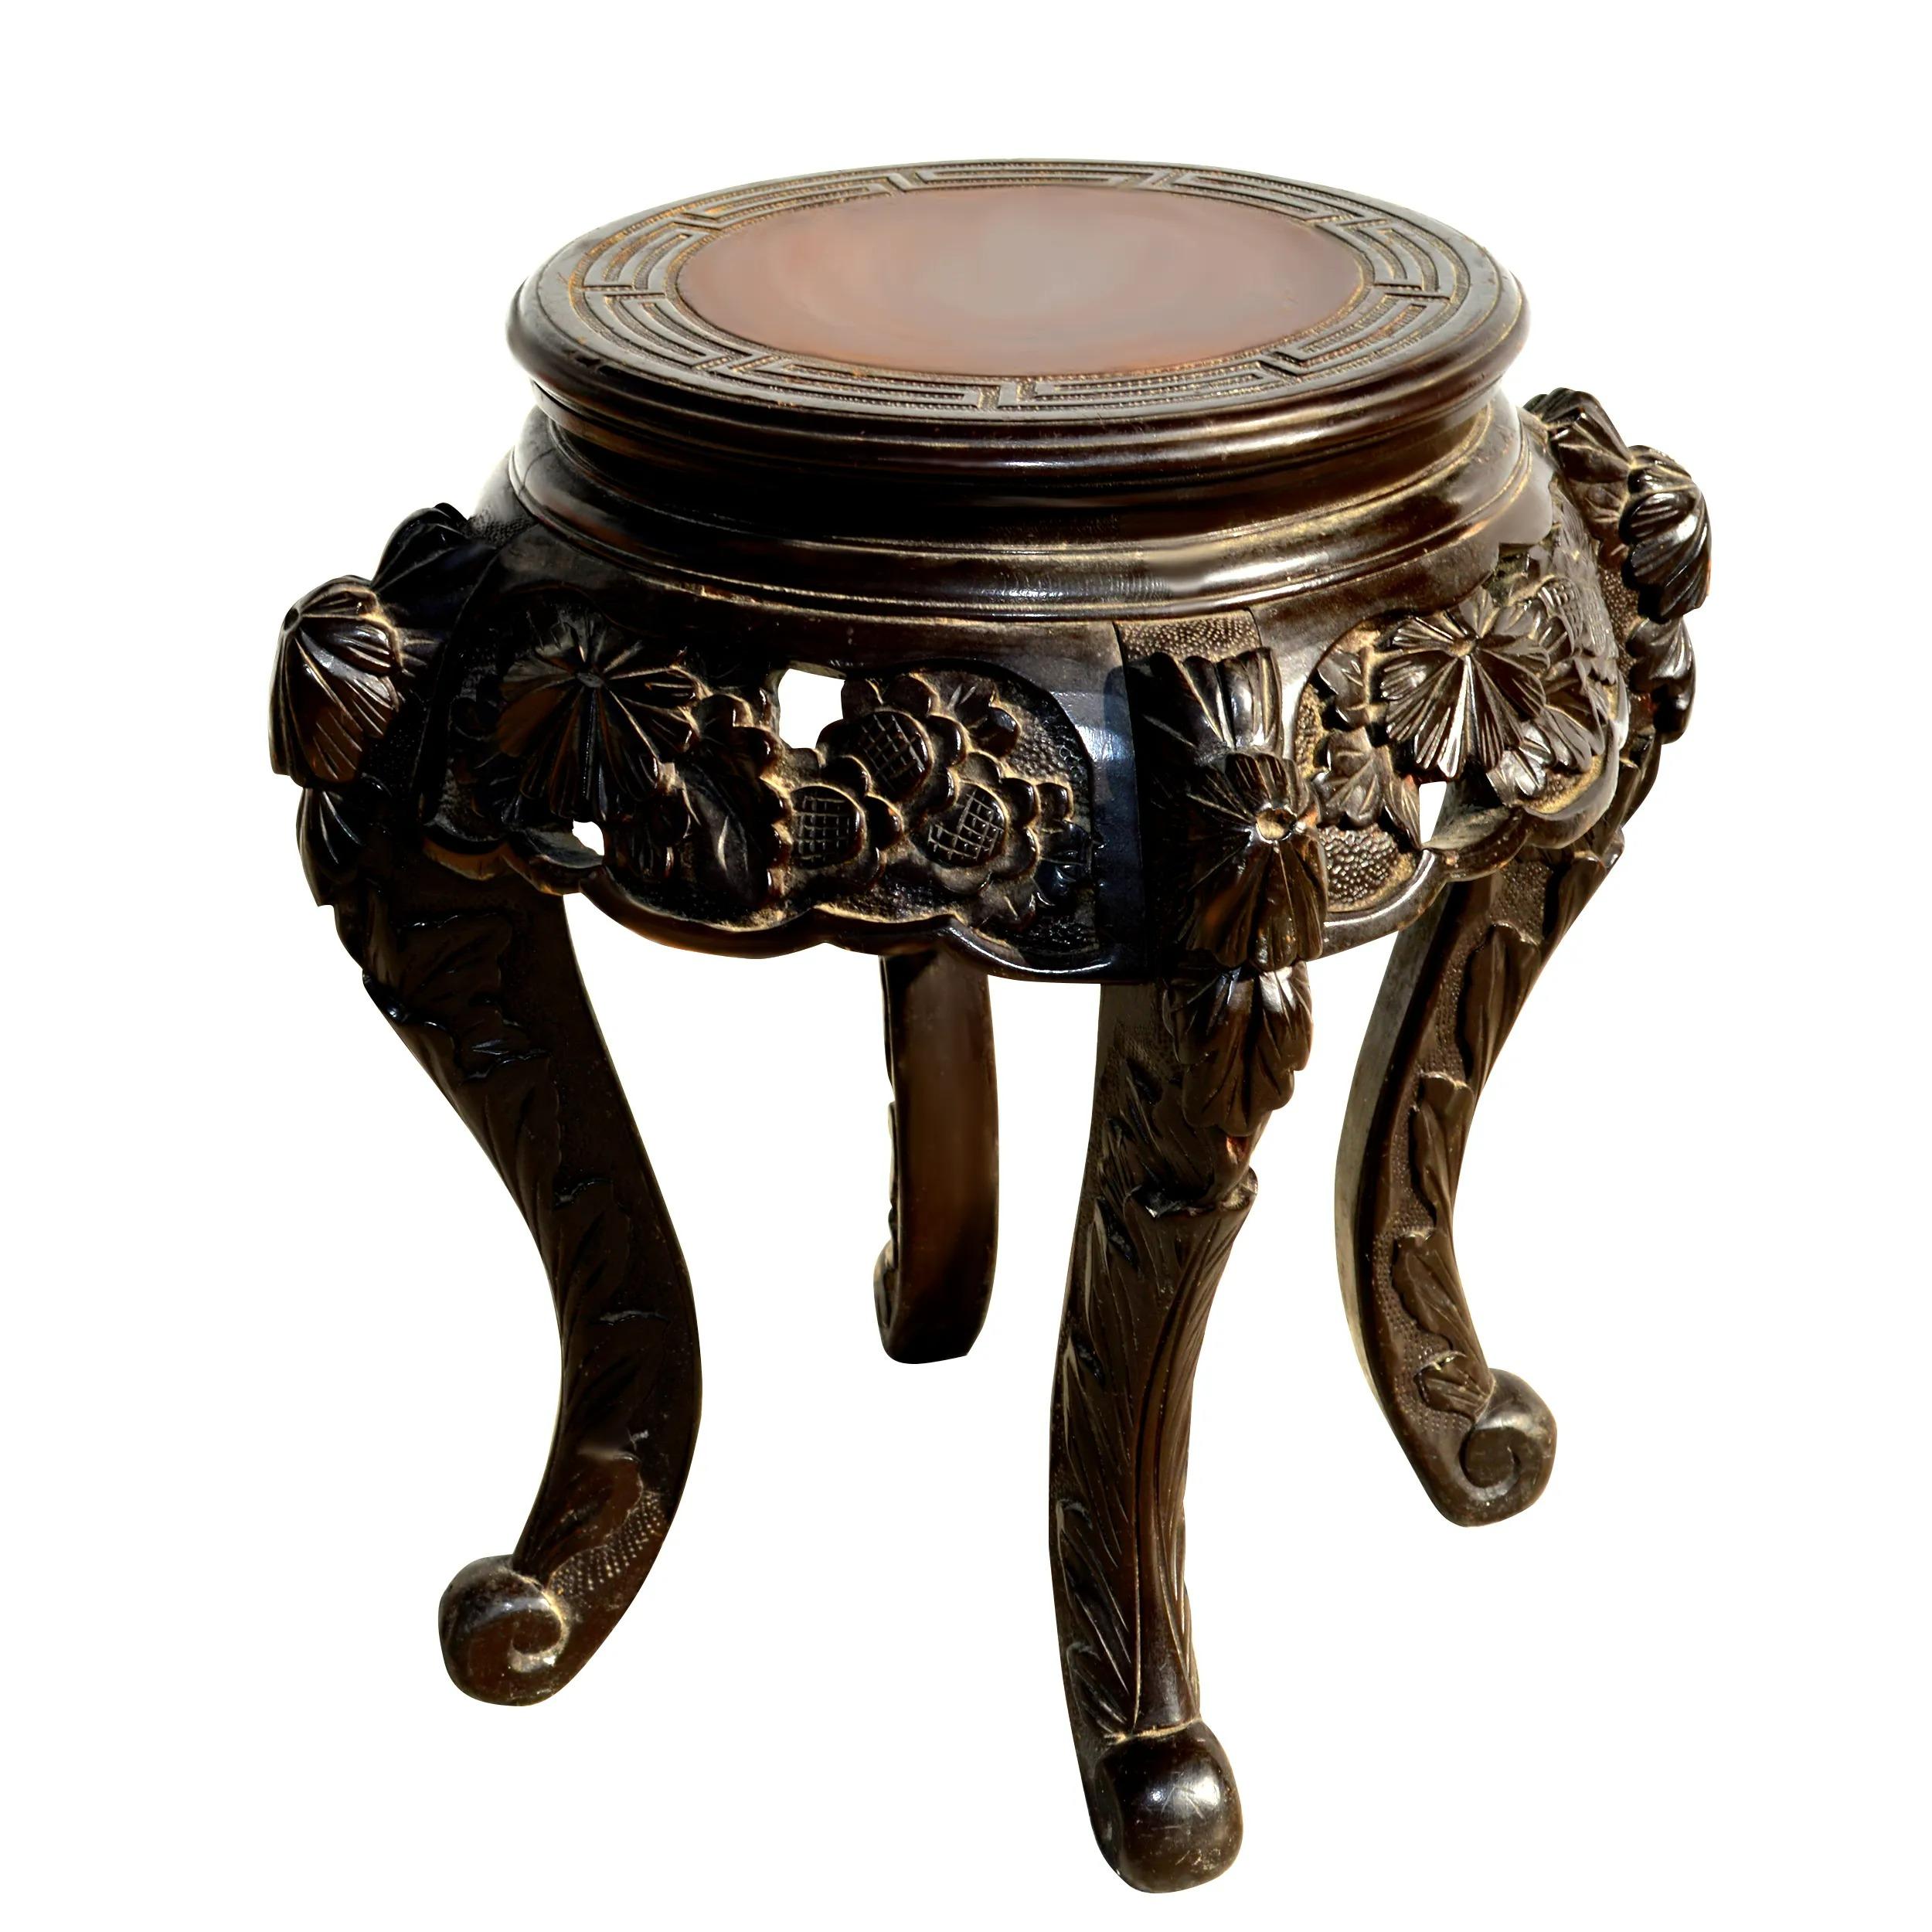 Vintage Carved Chinese Side Table

Vintage mid-century ebonized pedestal or side table.
Intricately carved floral motifs on apron and cabriole legs.
 